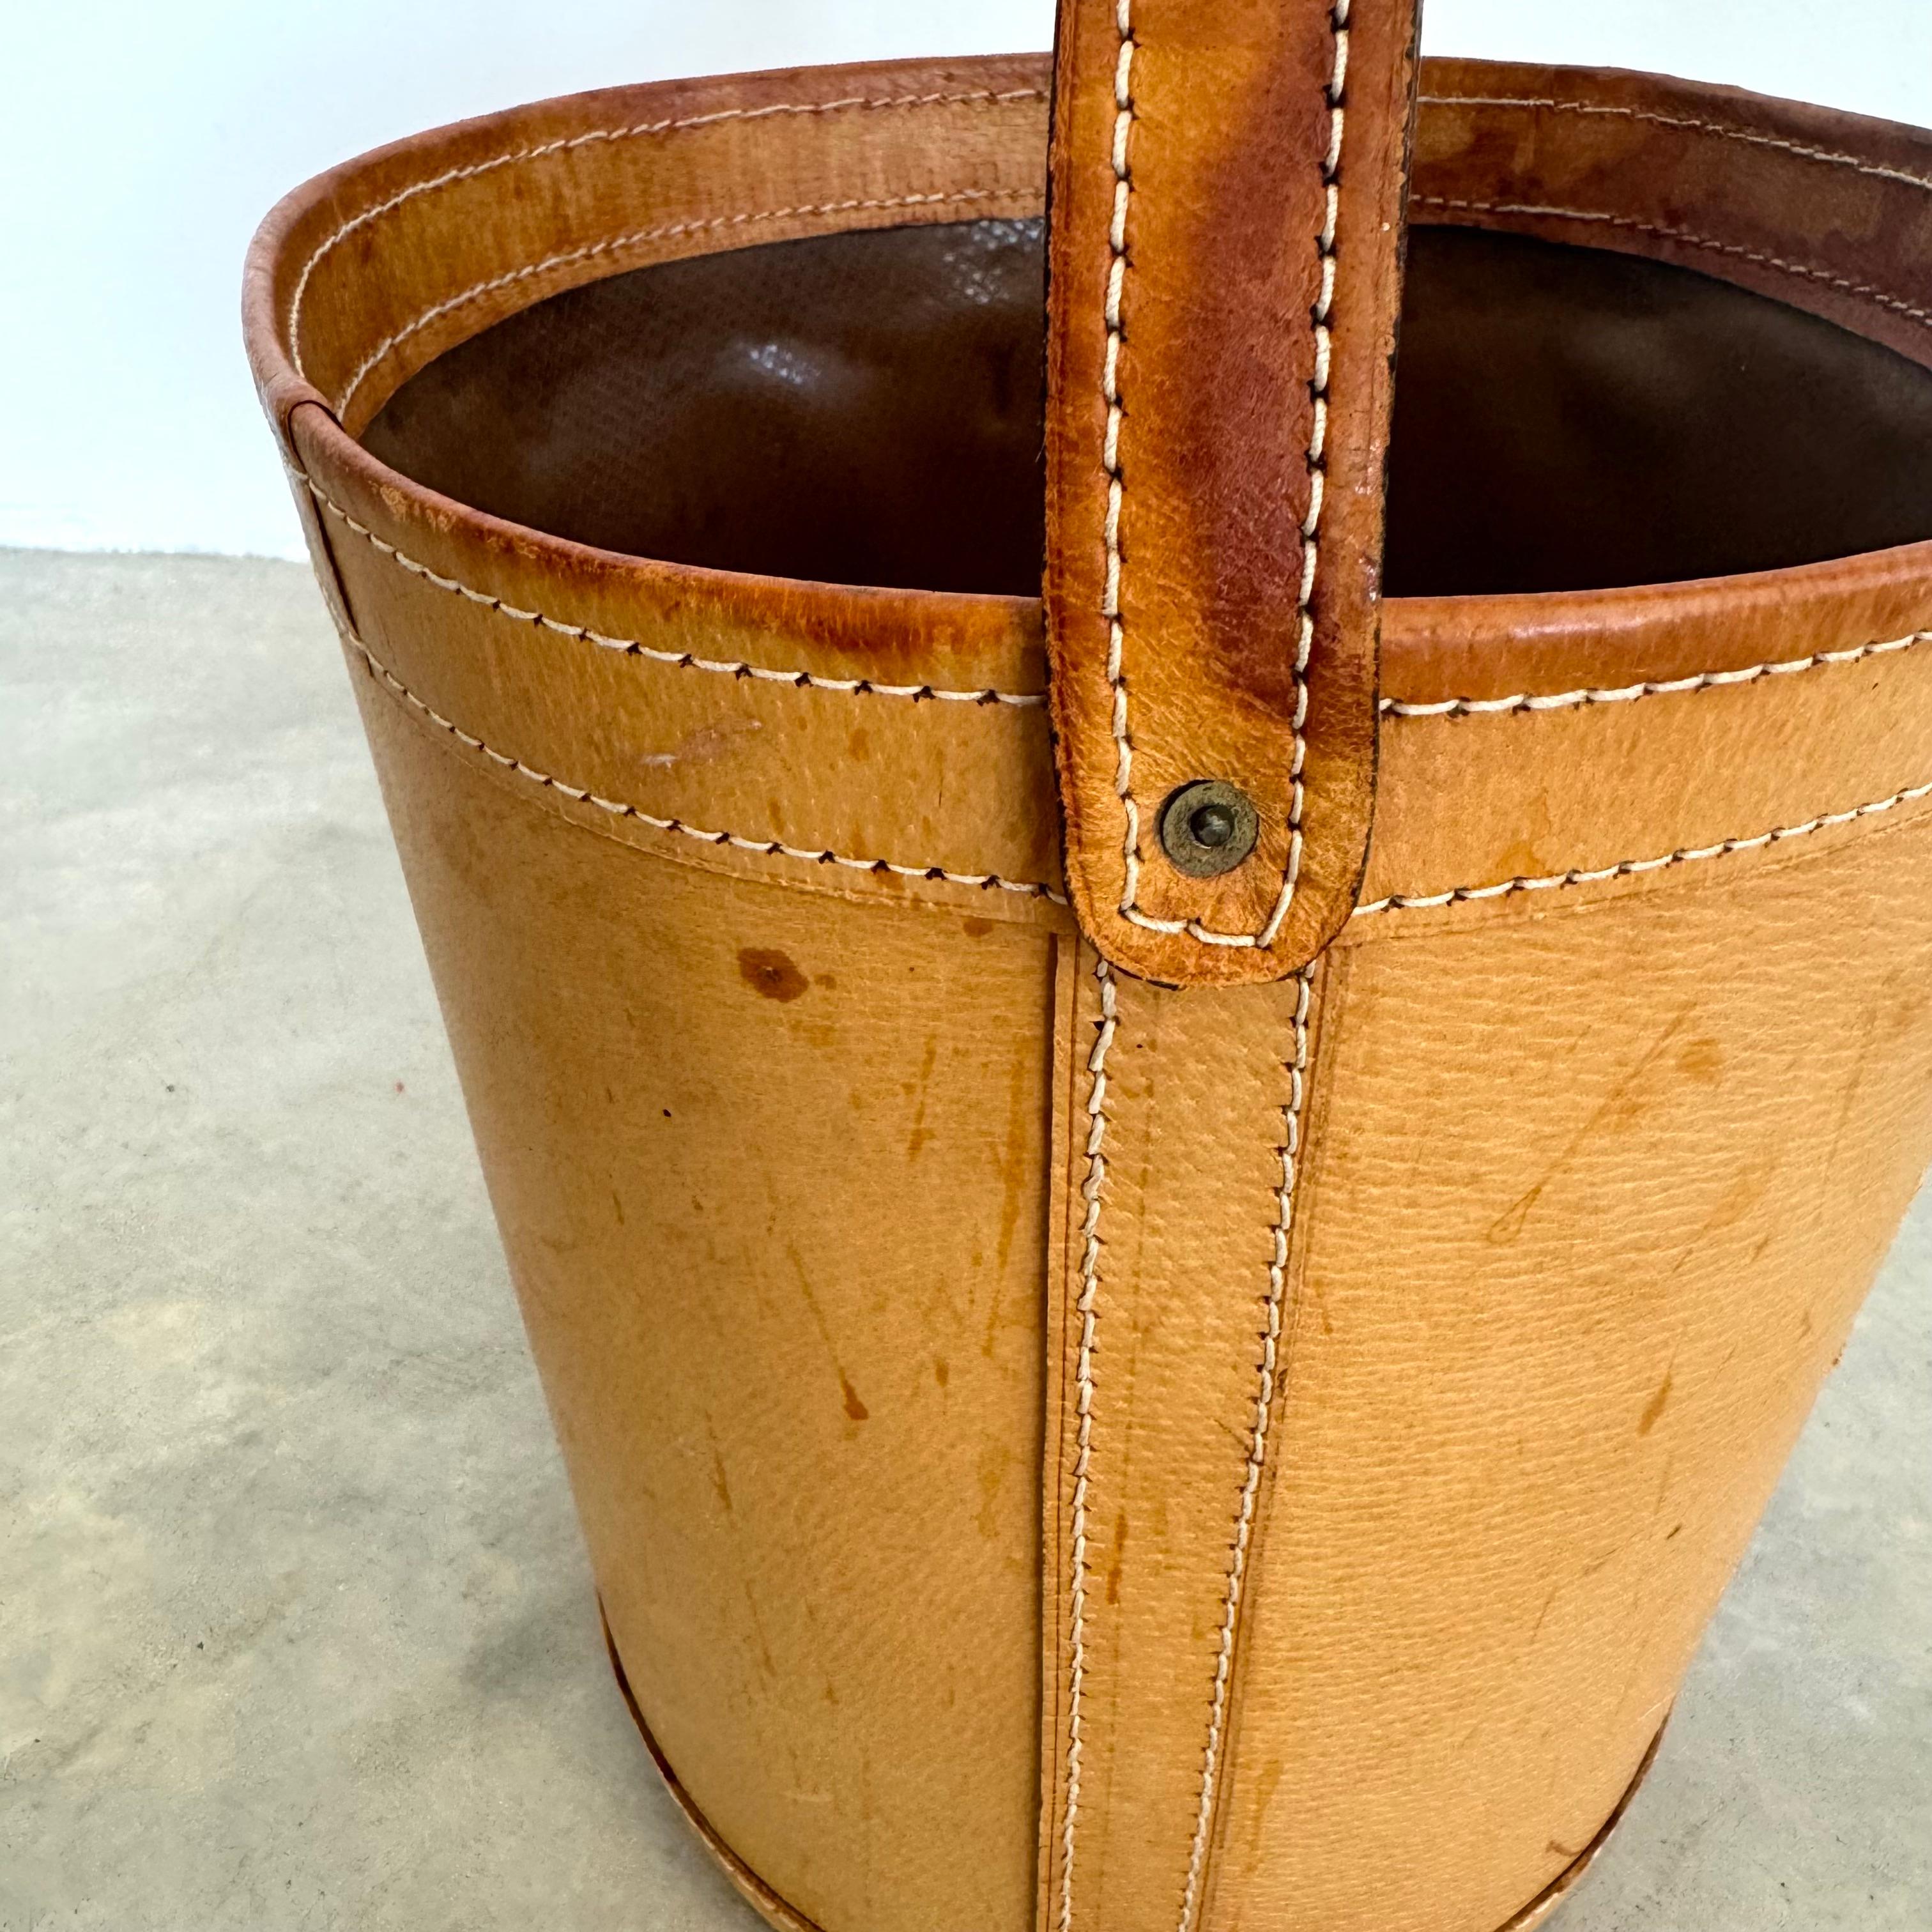 French saddle leather waste bin in the style of Jacques Adnet, with a substantial leather strap handle. Great coloring to saddle leather. Contrast stitch throughout. Plastic lining inside the bin to protect the leather against soiling or staining.